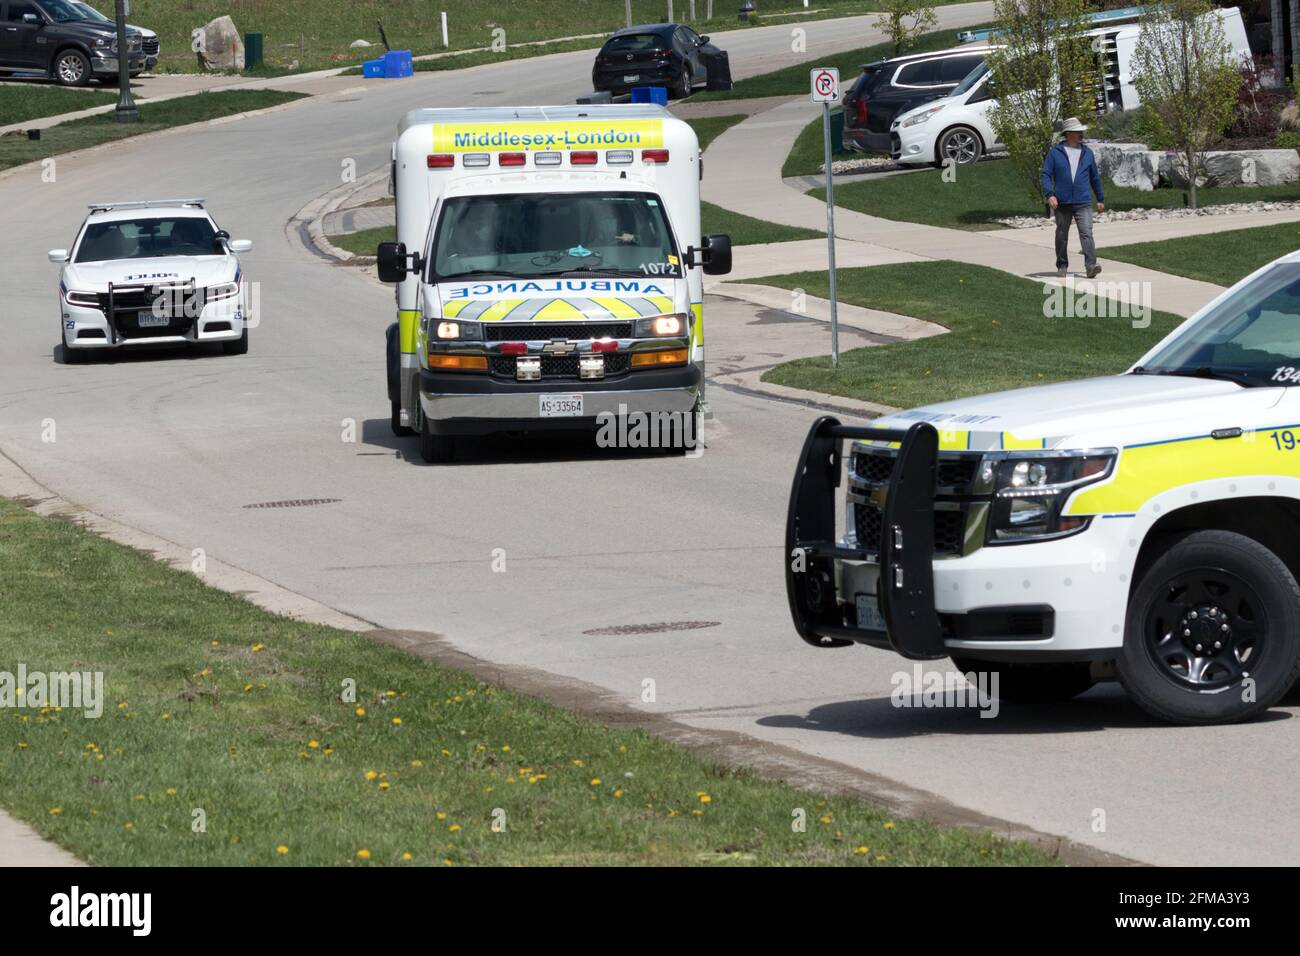 Emergency vehicles, police and ambulance (London EMS) block a roadway responding to a call in London, Ontario, Canada. Stock Photo